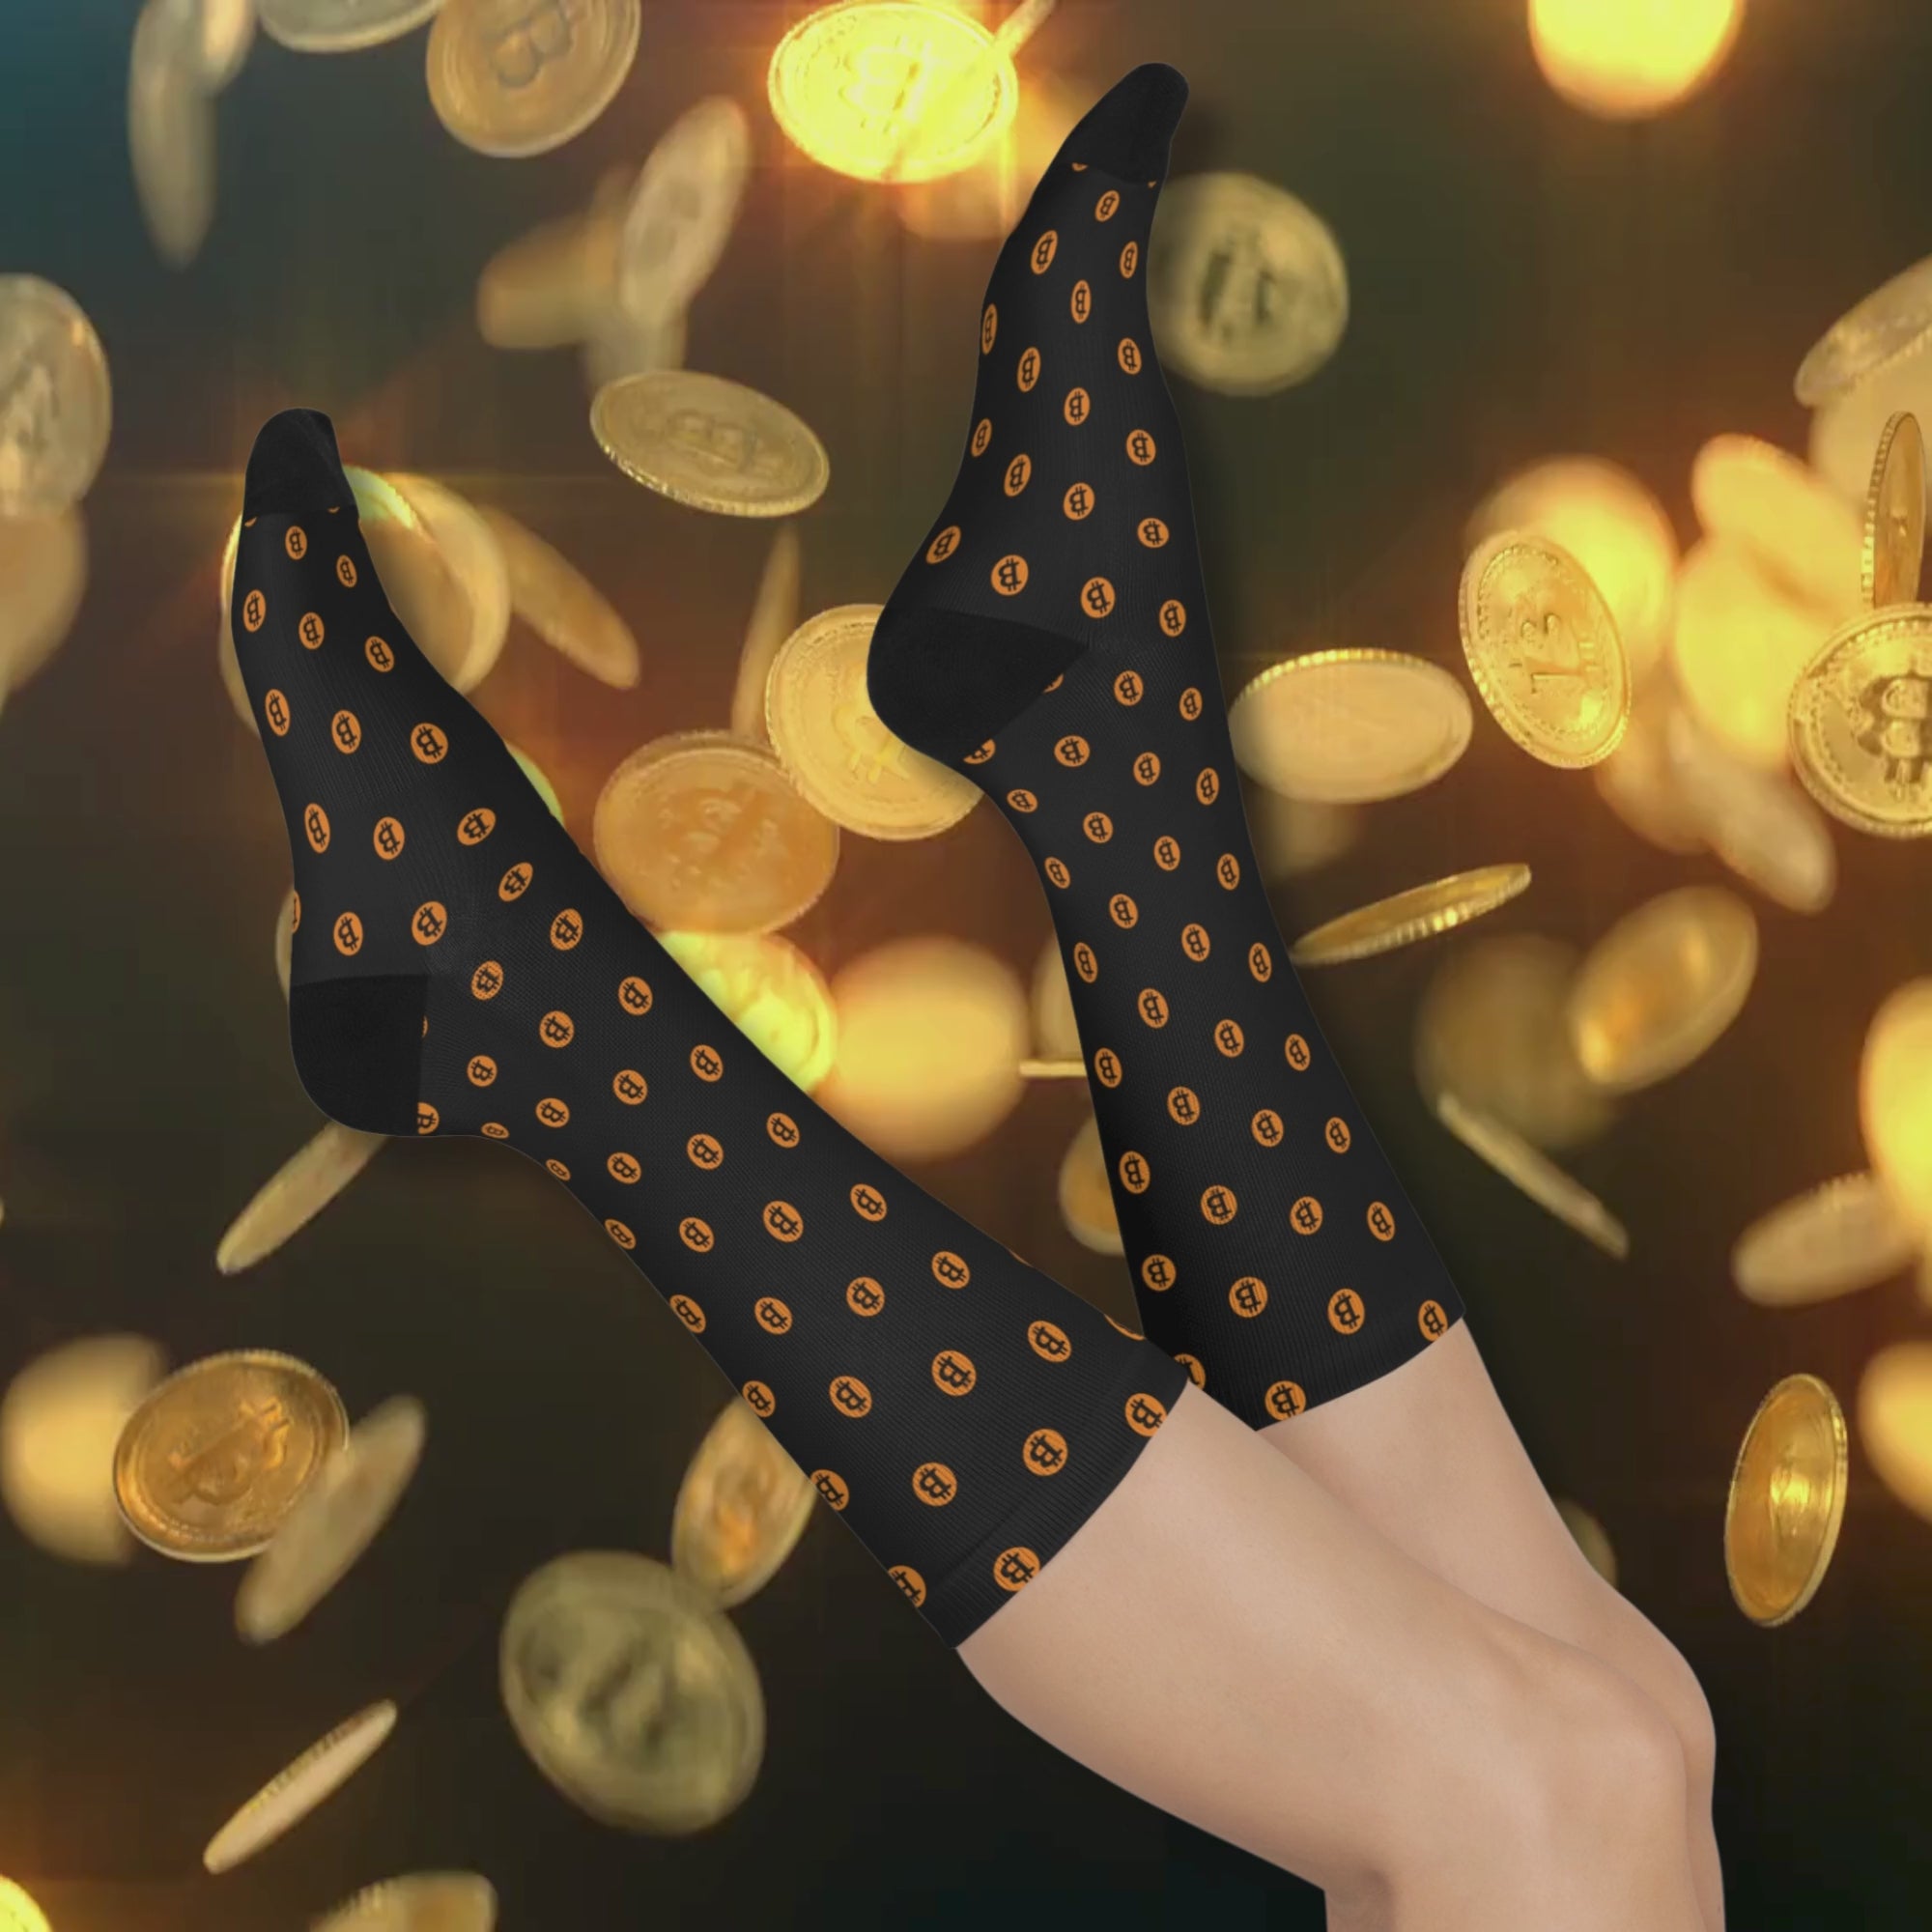 Gifts for Bitcoin Lovers - Bitcoin Logo Socks. Available from NEONCRYPTO STORE.